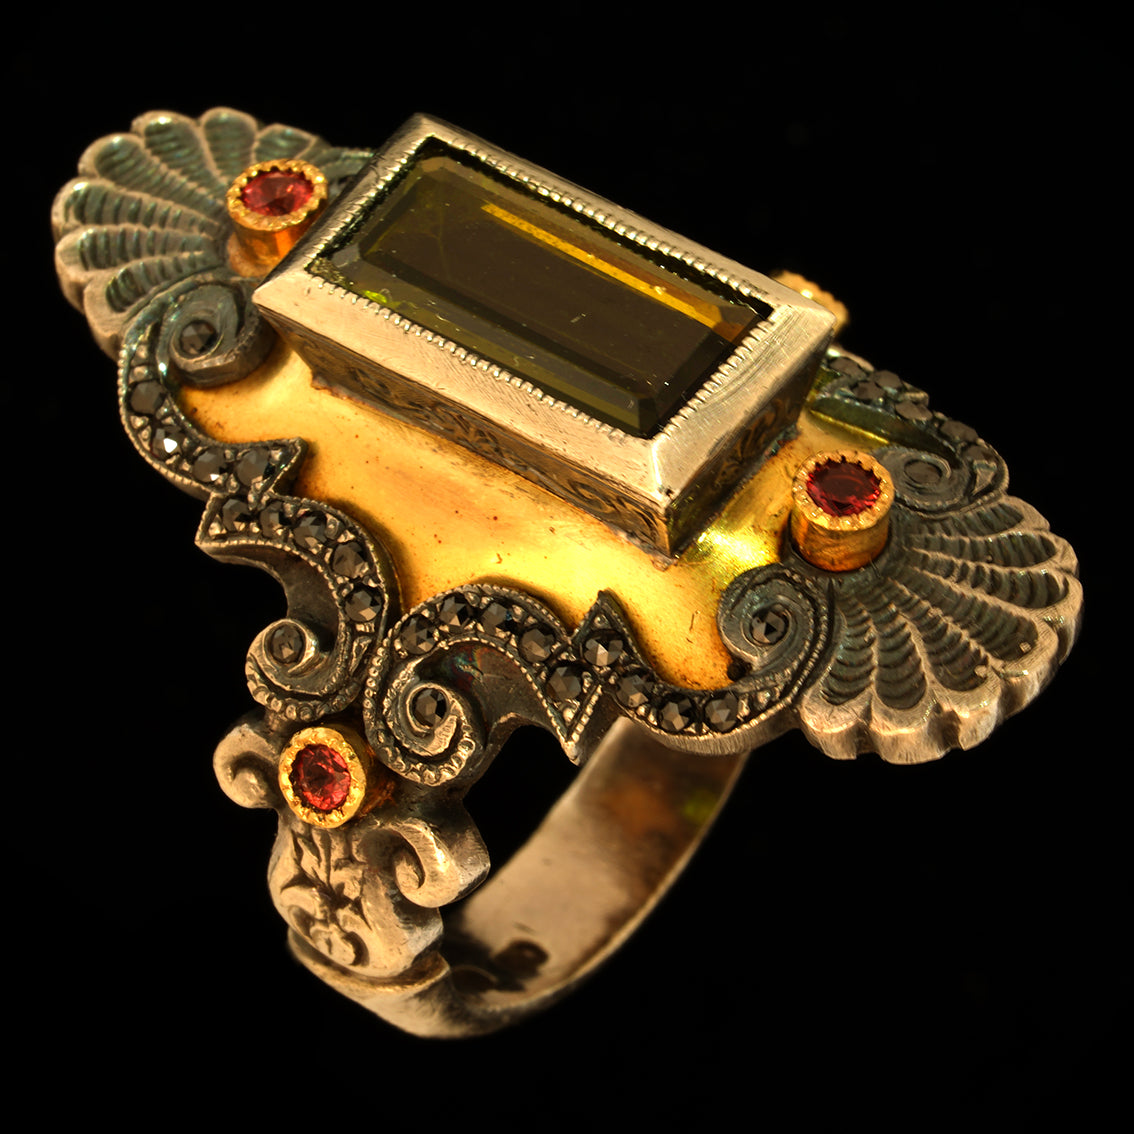 THE GOLDEN SHADOW RING